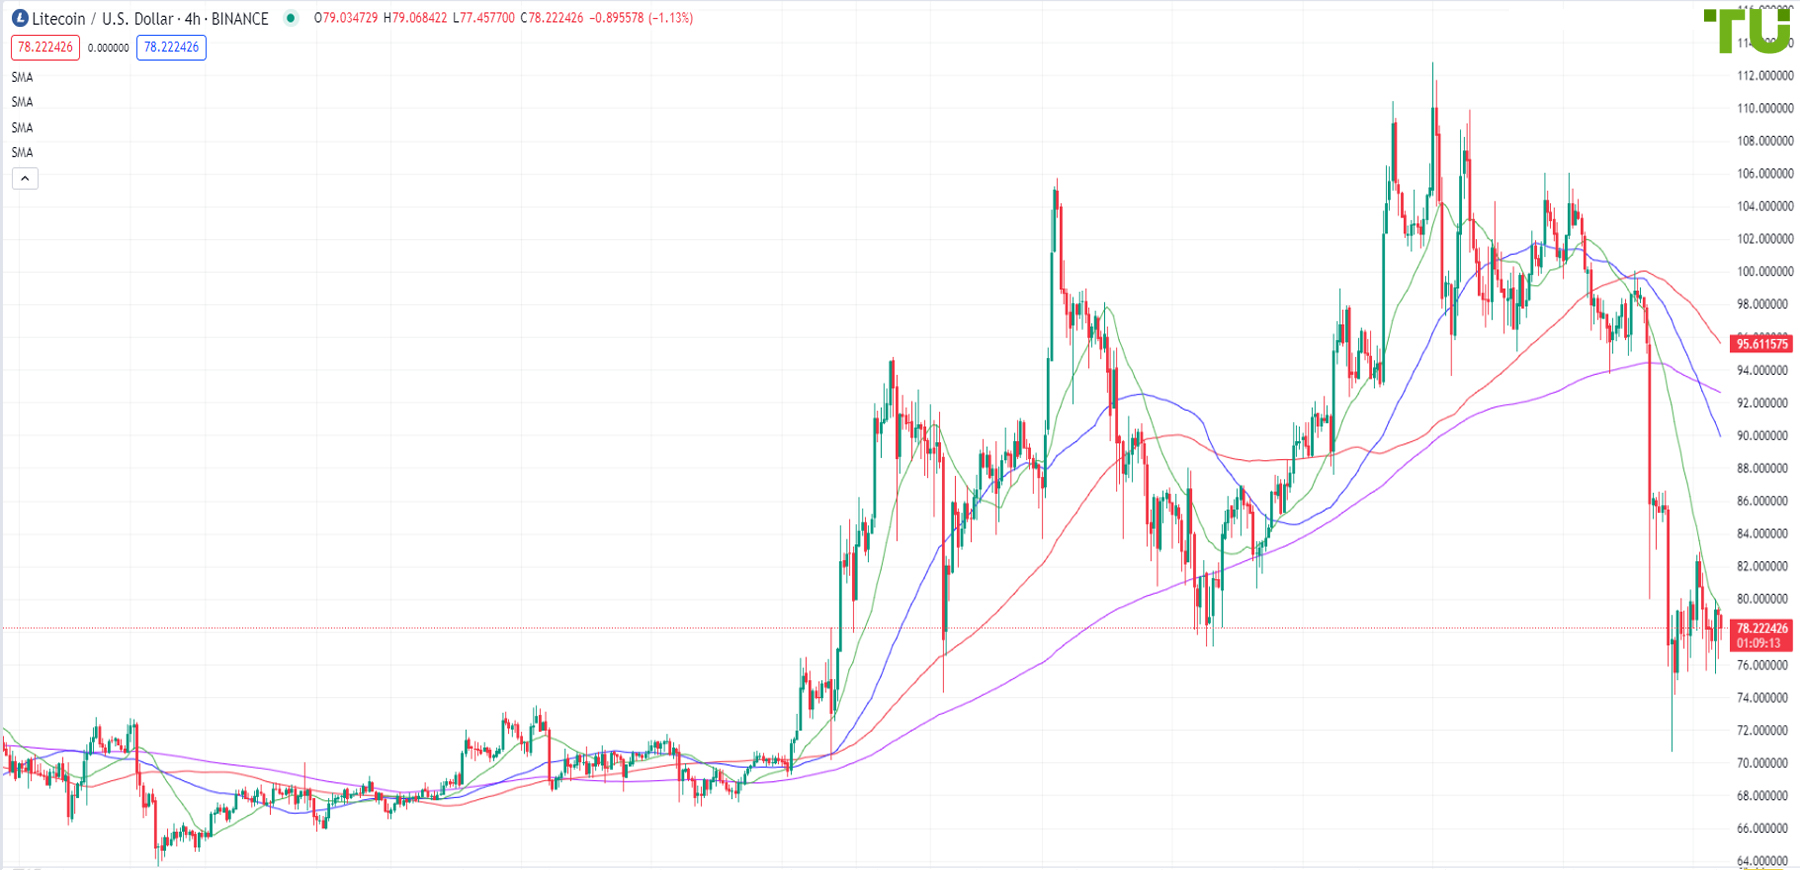 LTC/USD broke the support and continued its decline